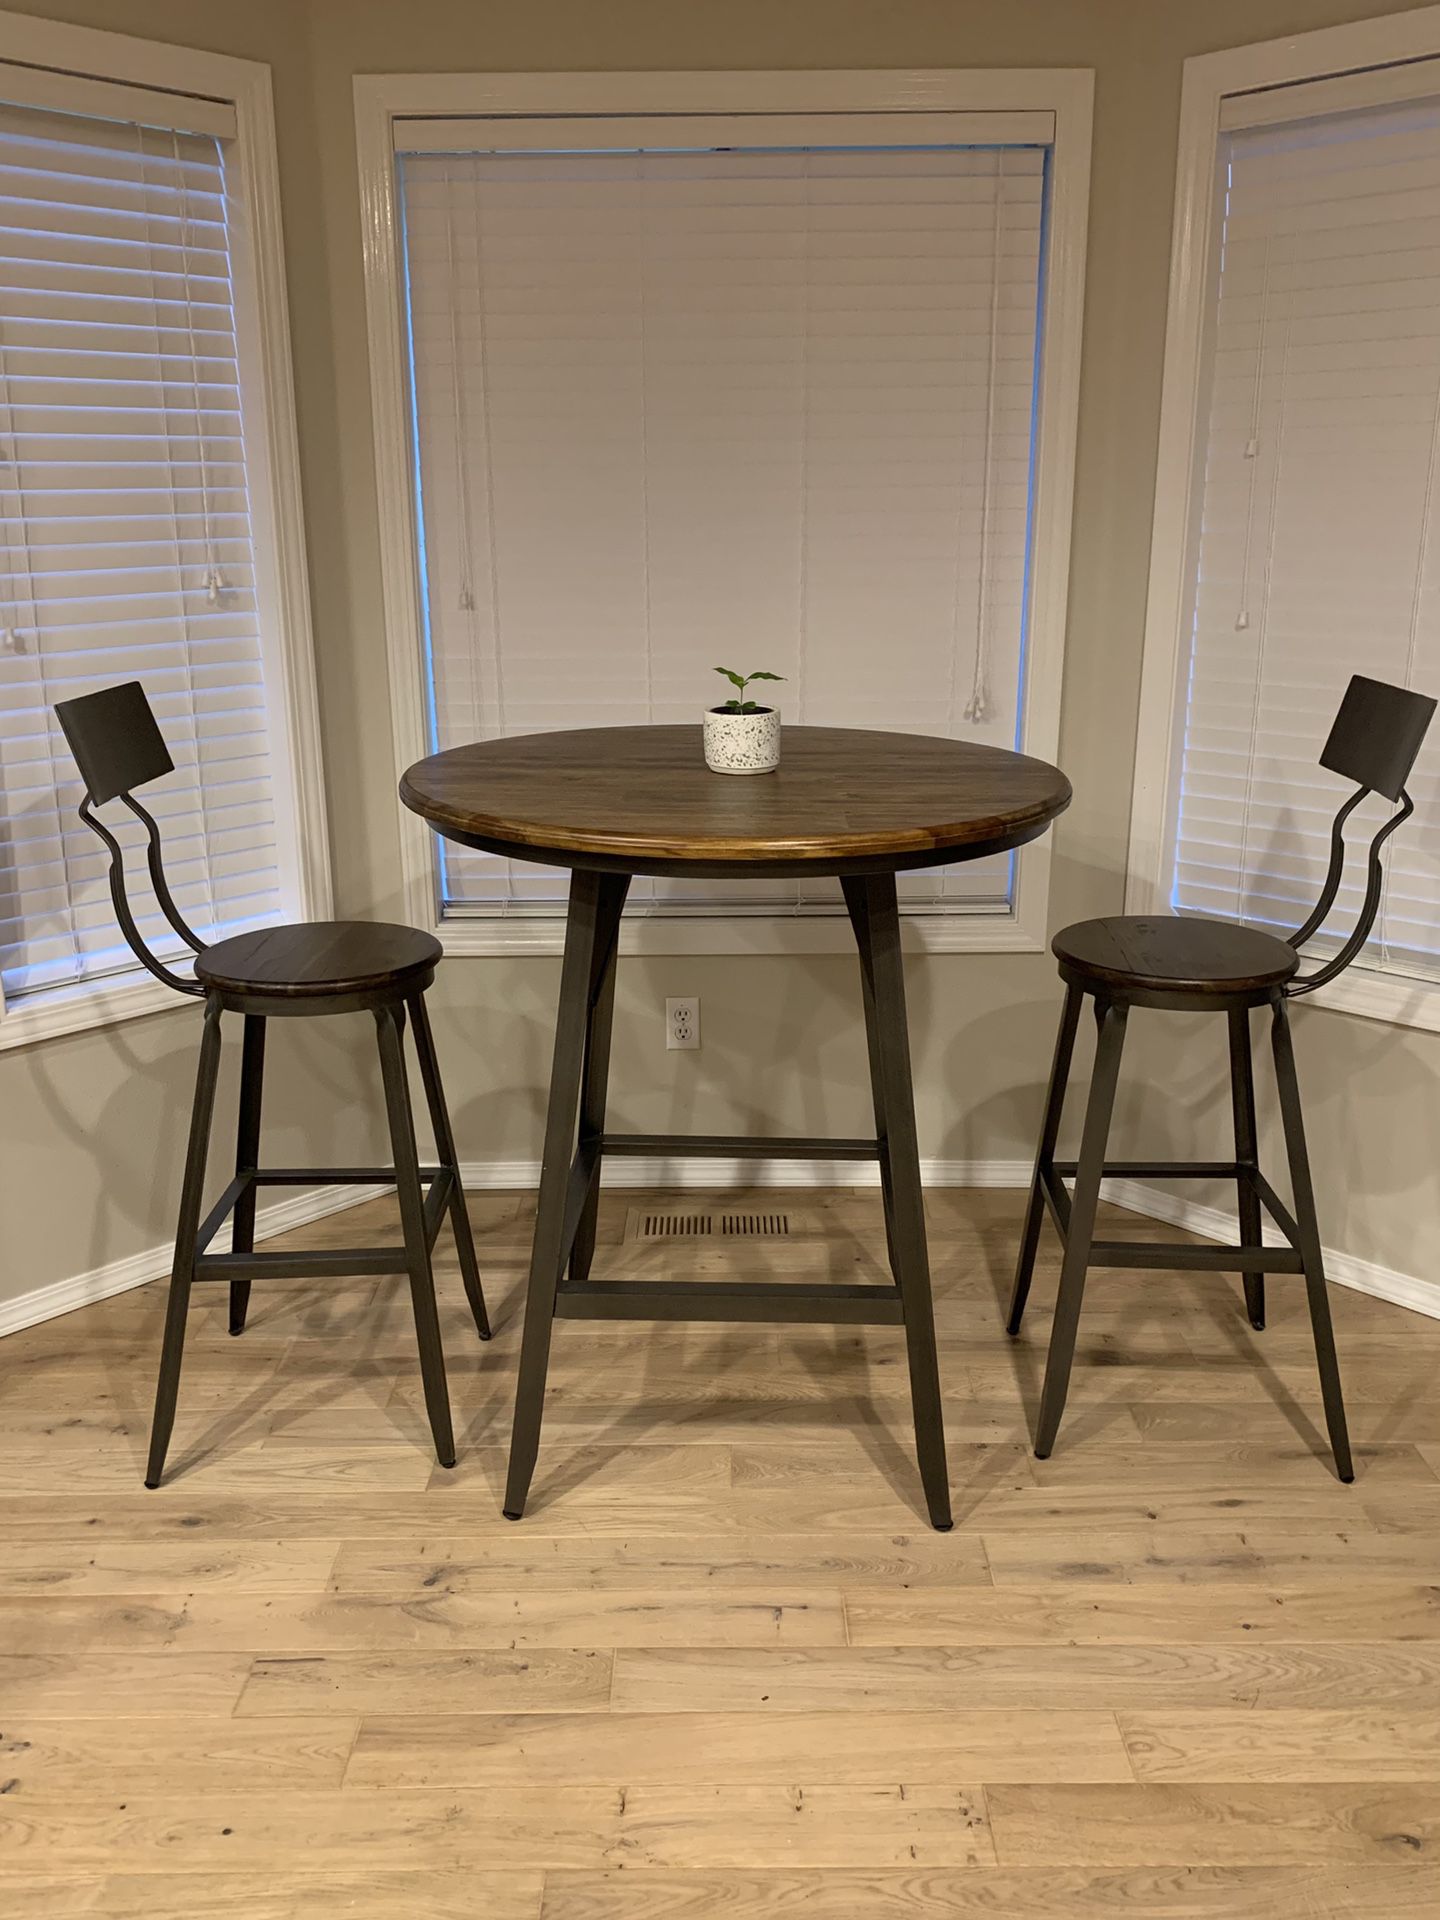 Beautiful solid wood pub dining table with two barstools - modern, industrial, farmhouse chic